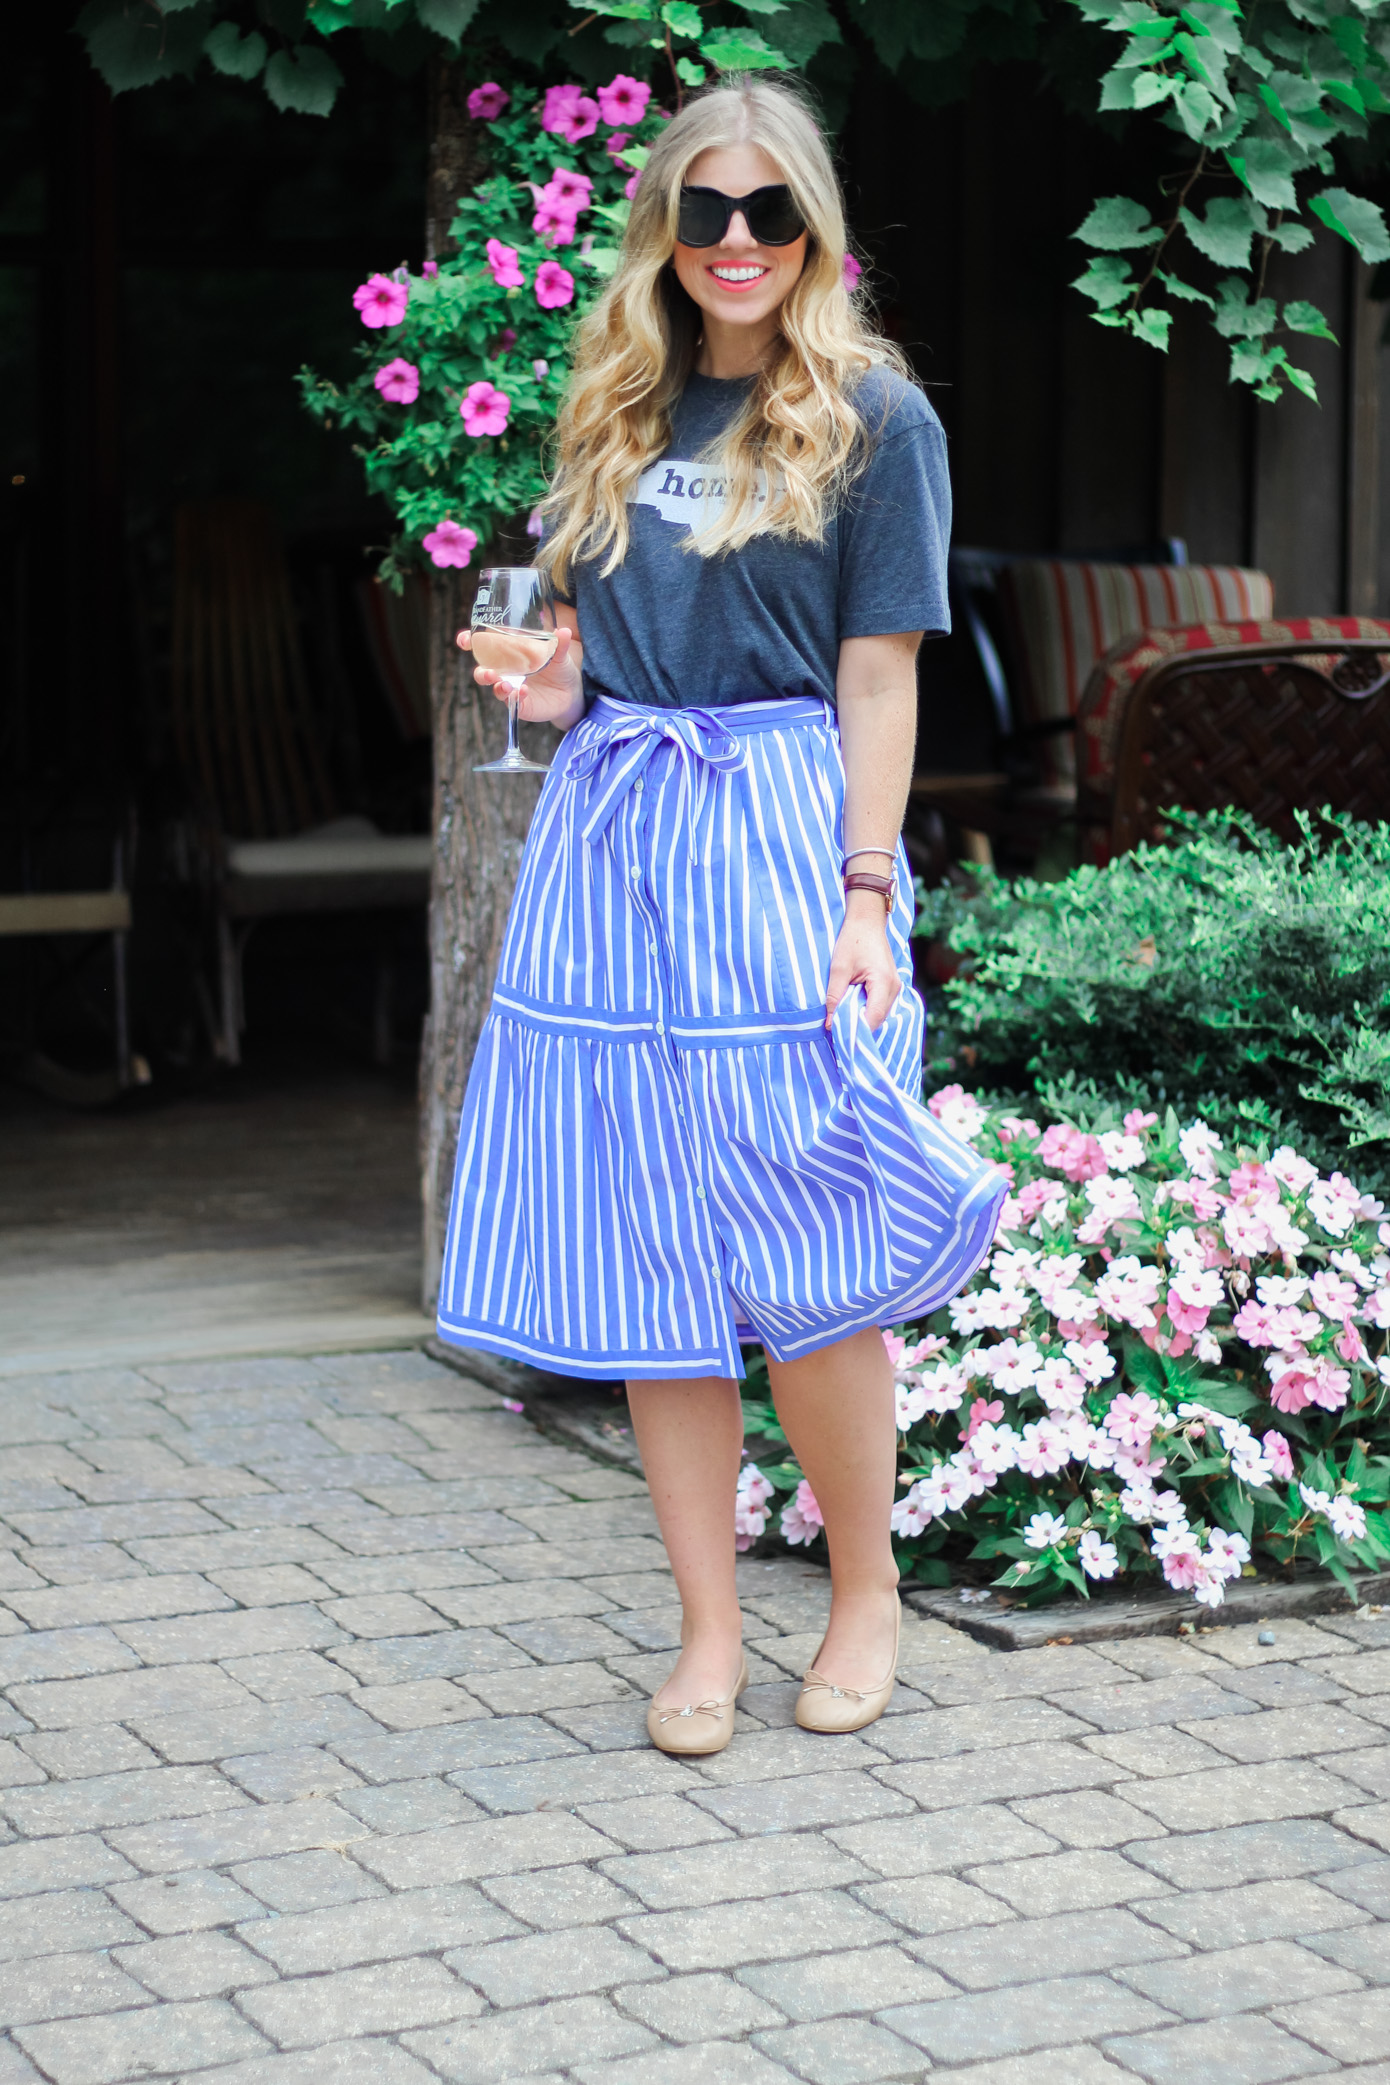 Home Tee Shirt | The Home T | What to Wear to a Winery | Louella Reese Life & Style Blog 